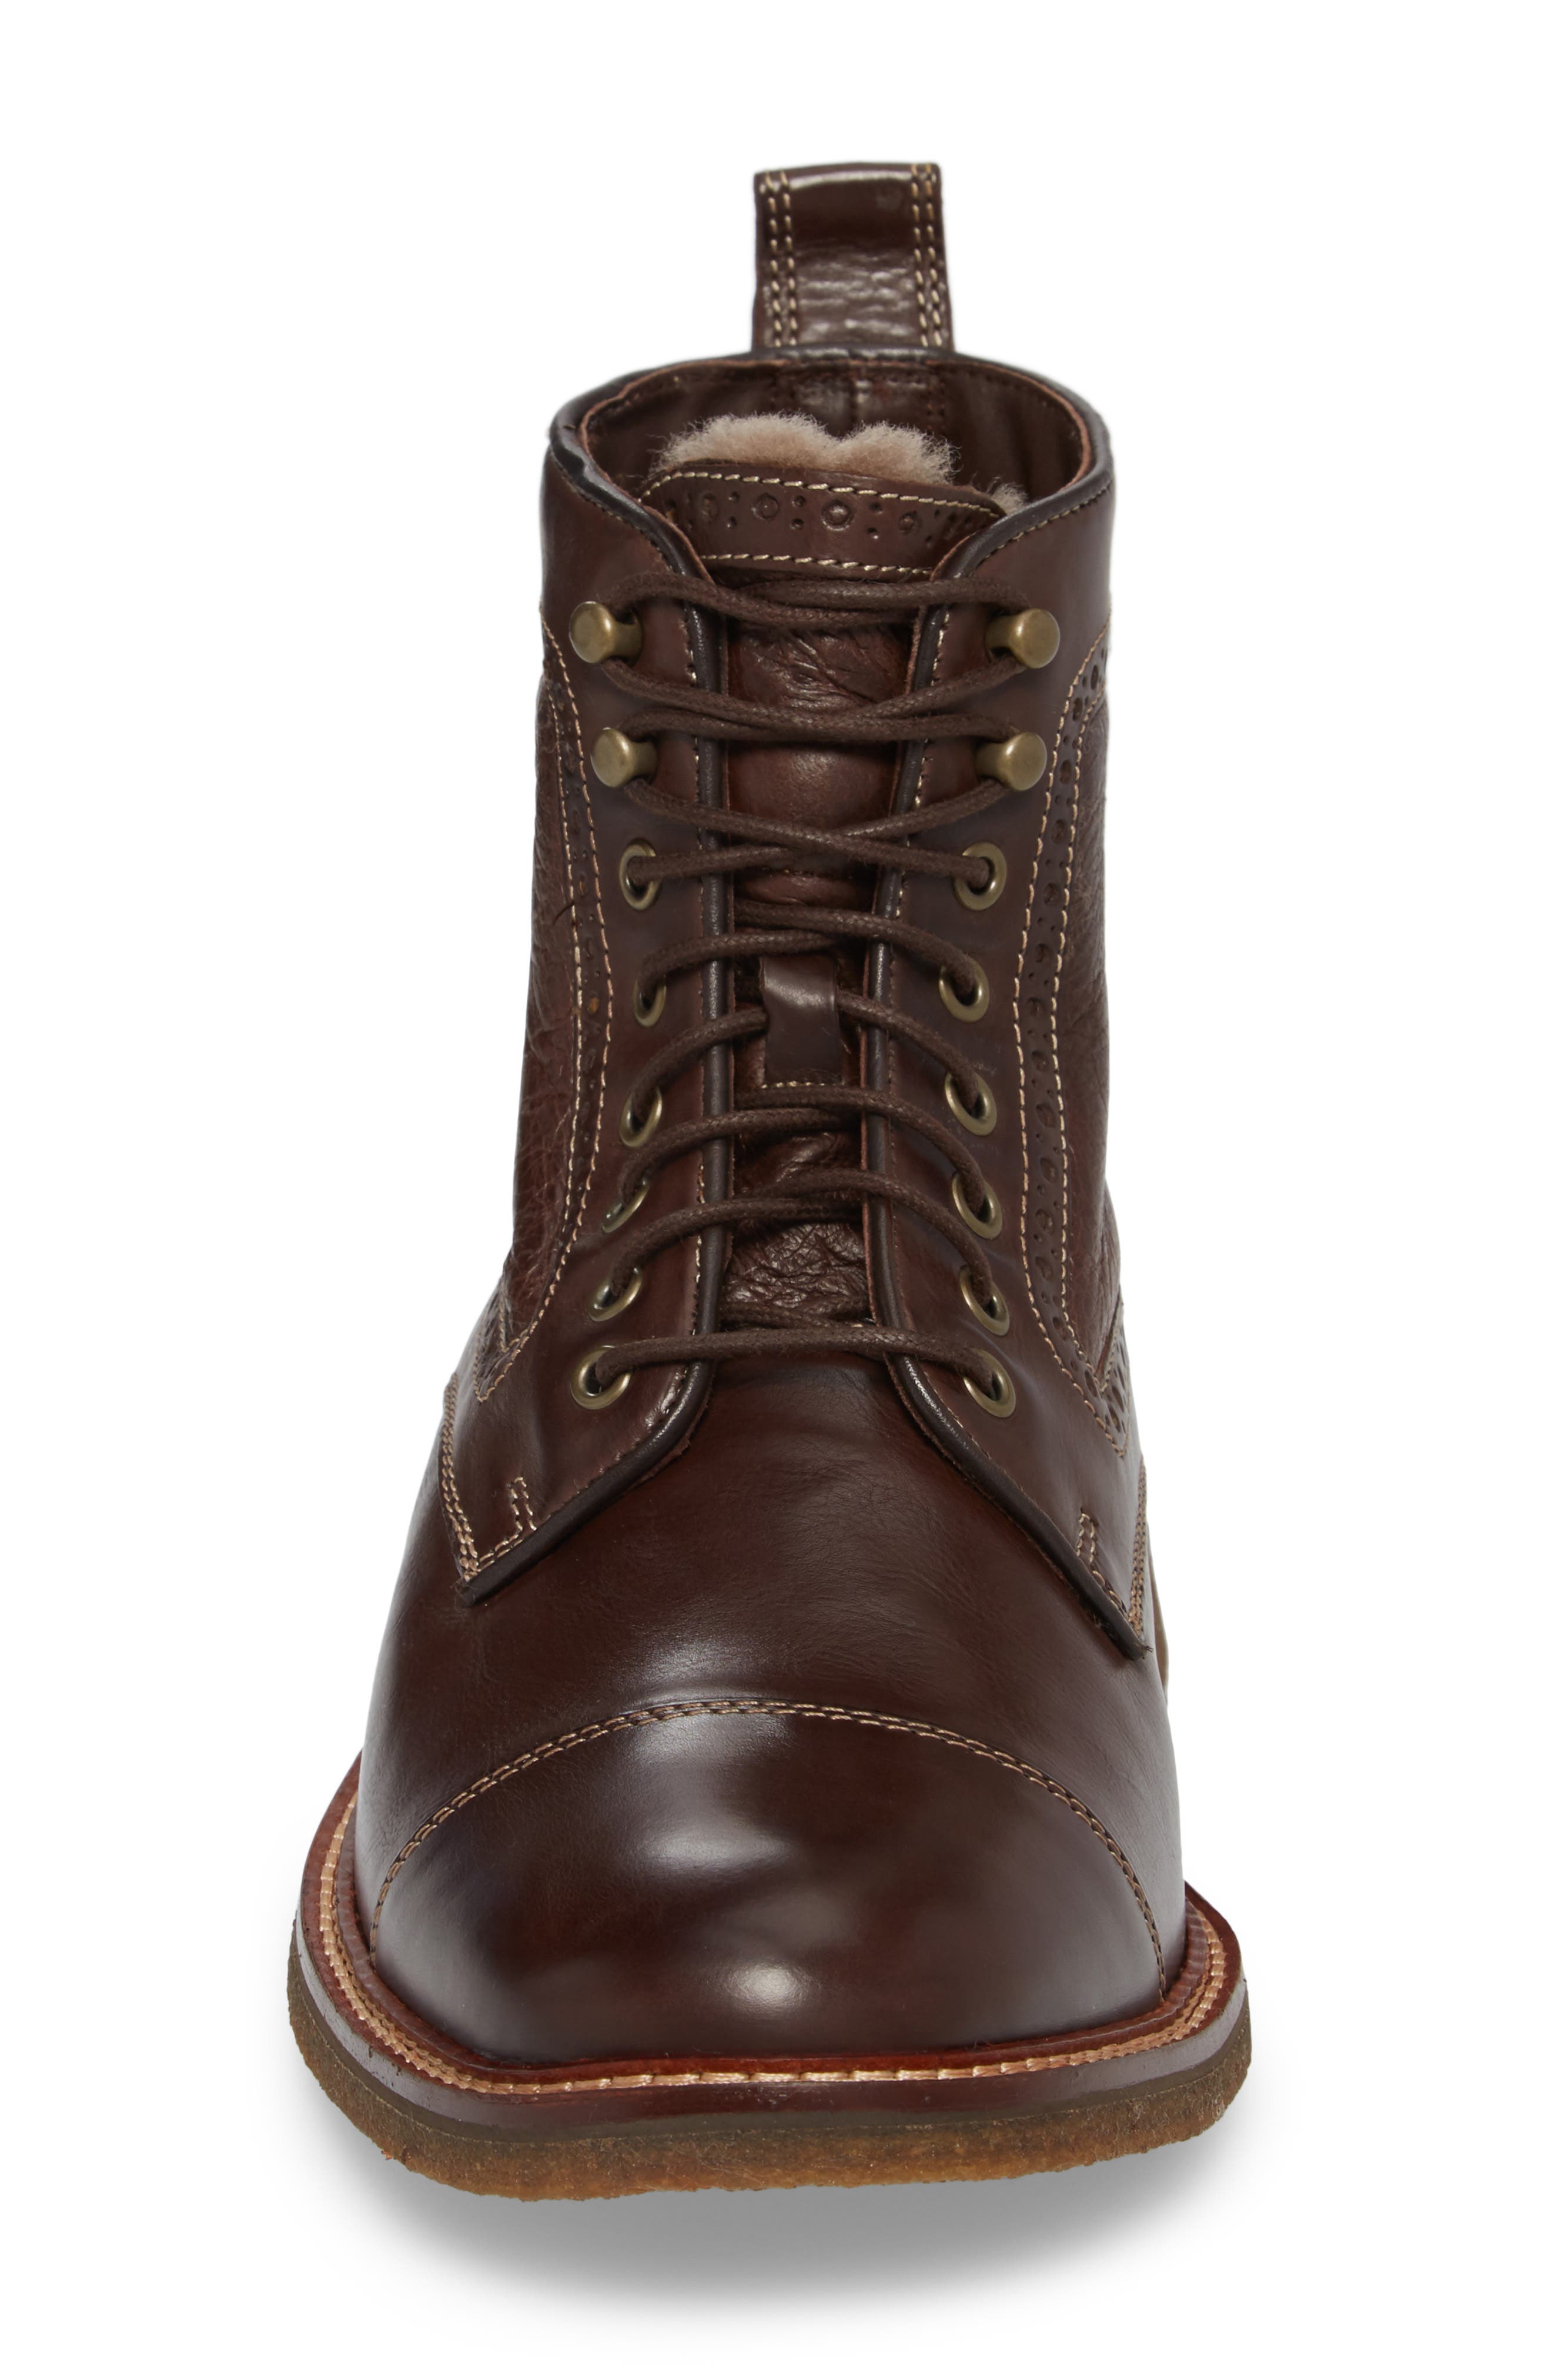 johnston and murphy forrester cap toe boot